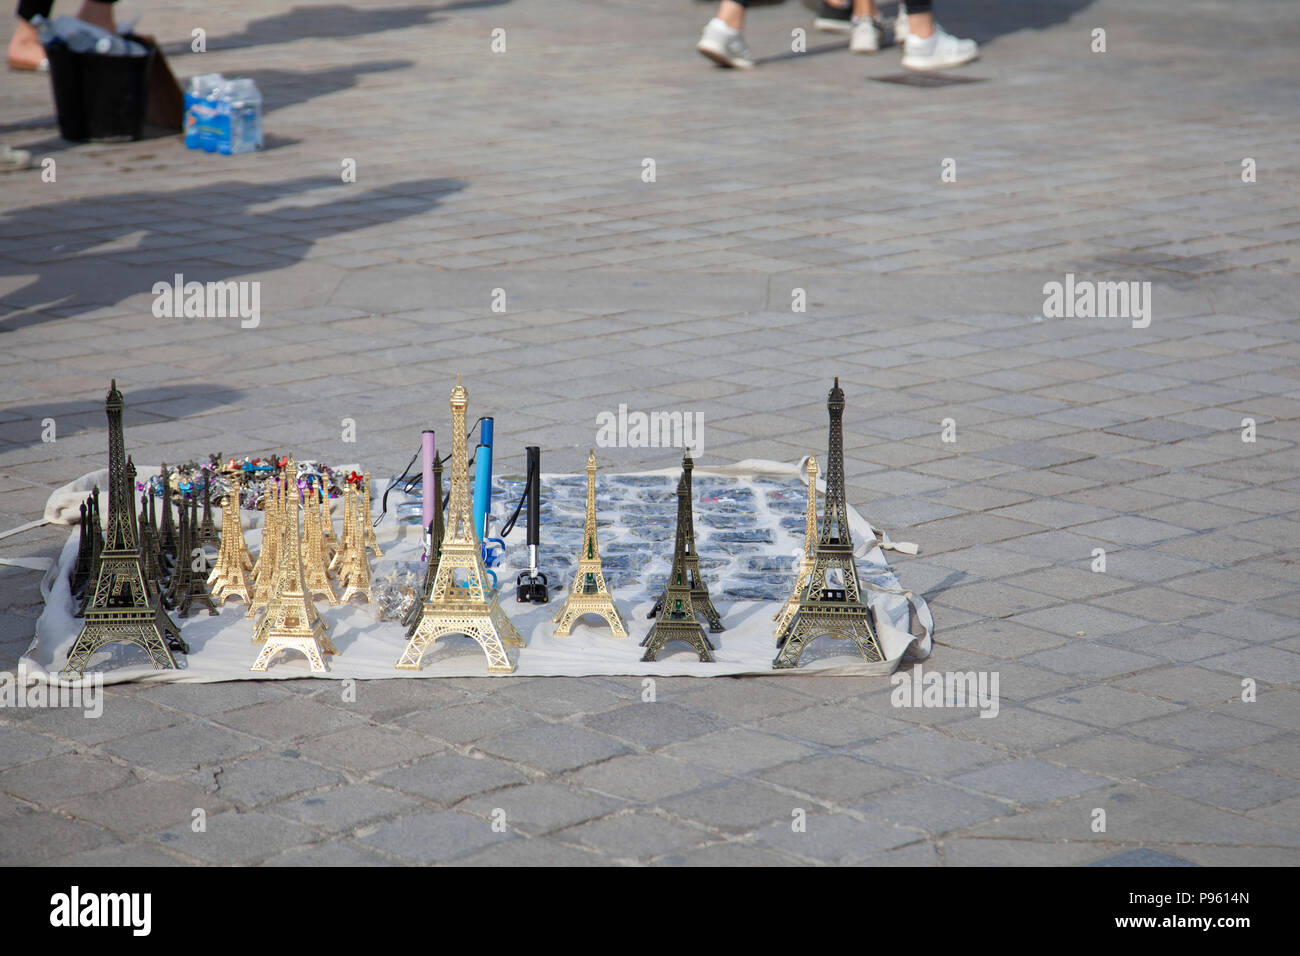 Eiffel Tower Souvenirs on Square outside Louvre in Paris, France Stock Photo